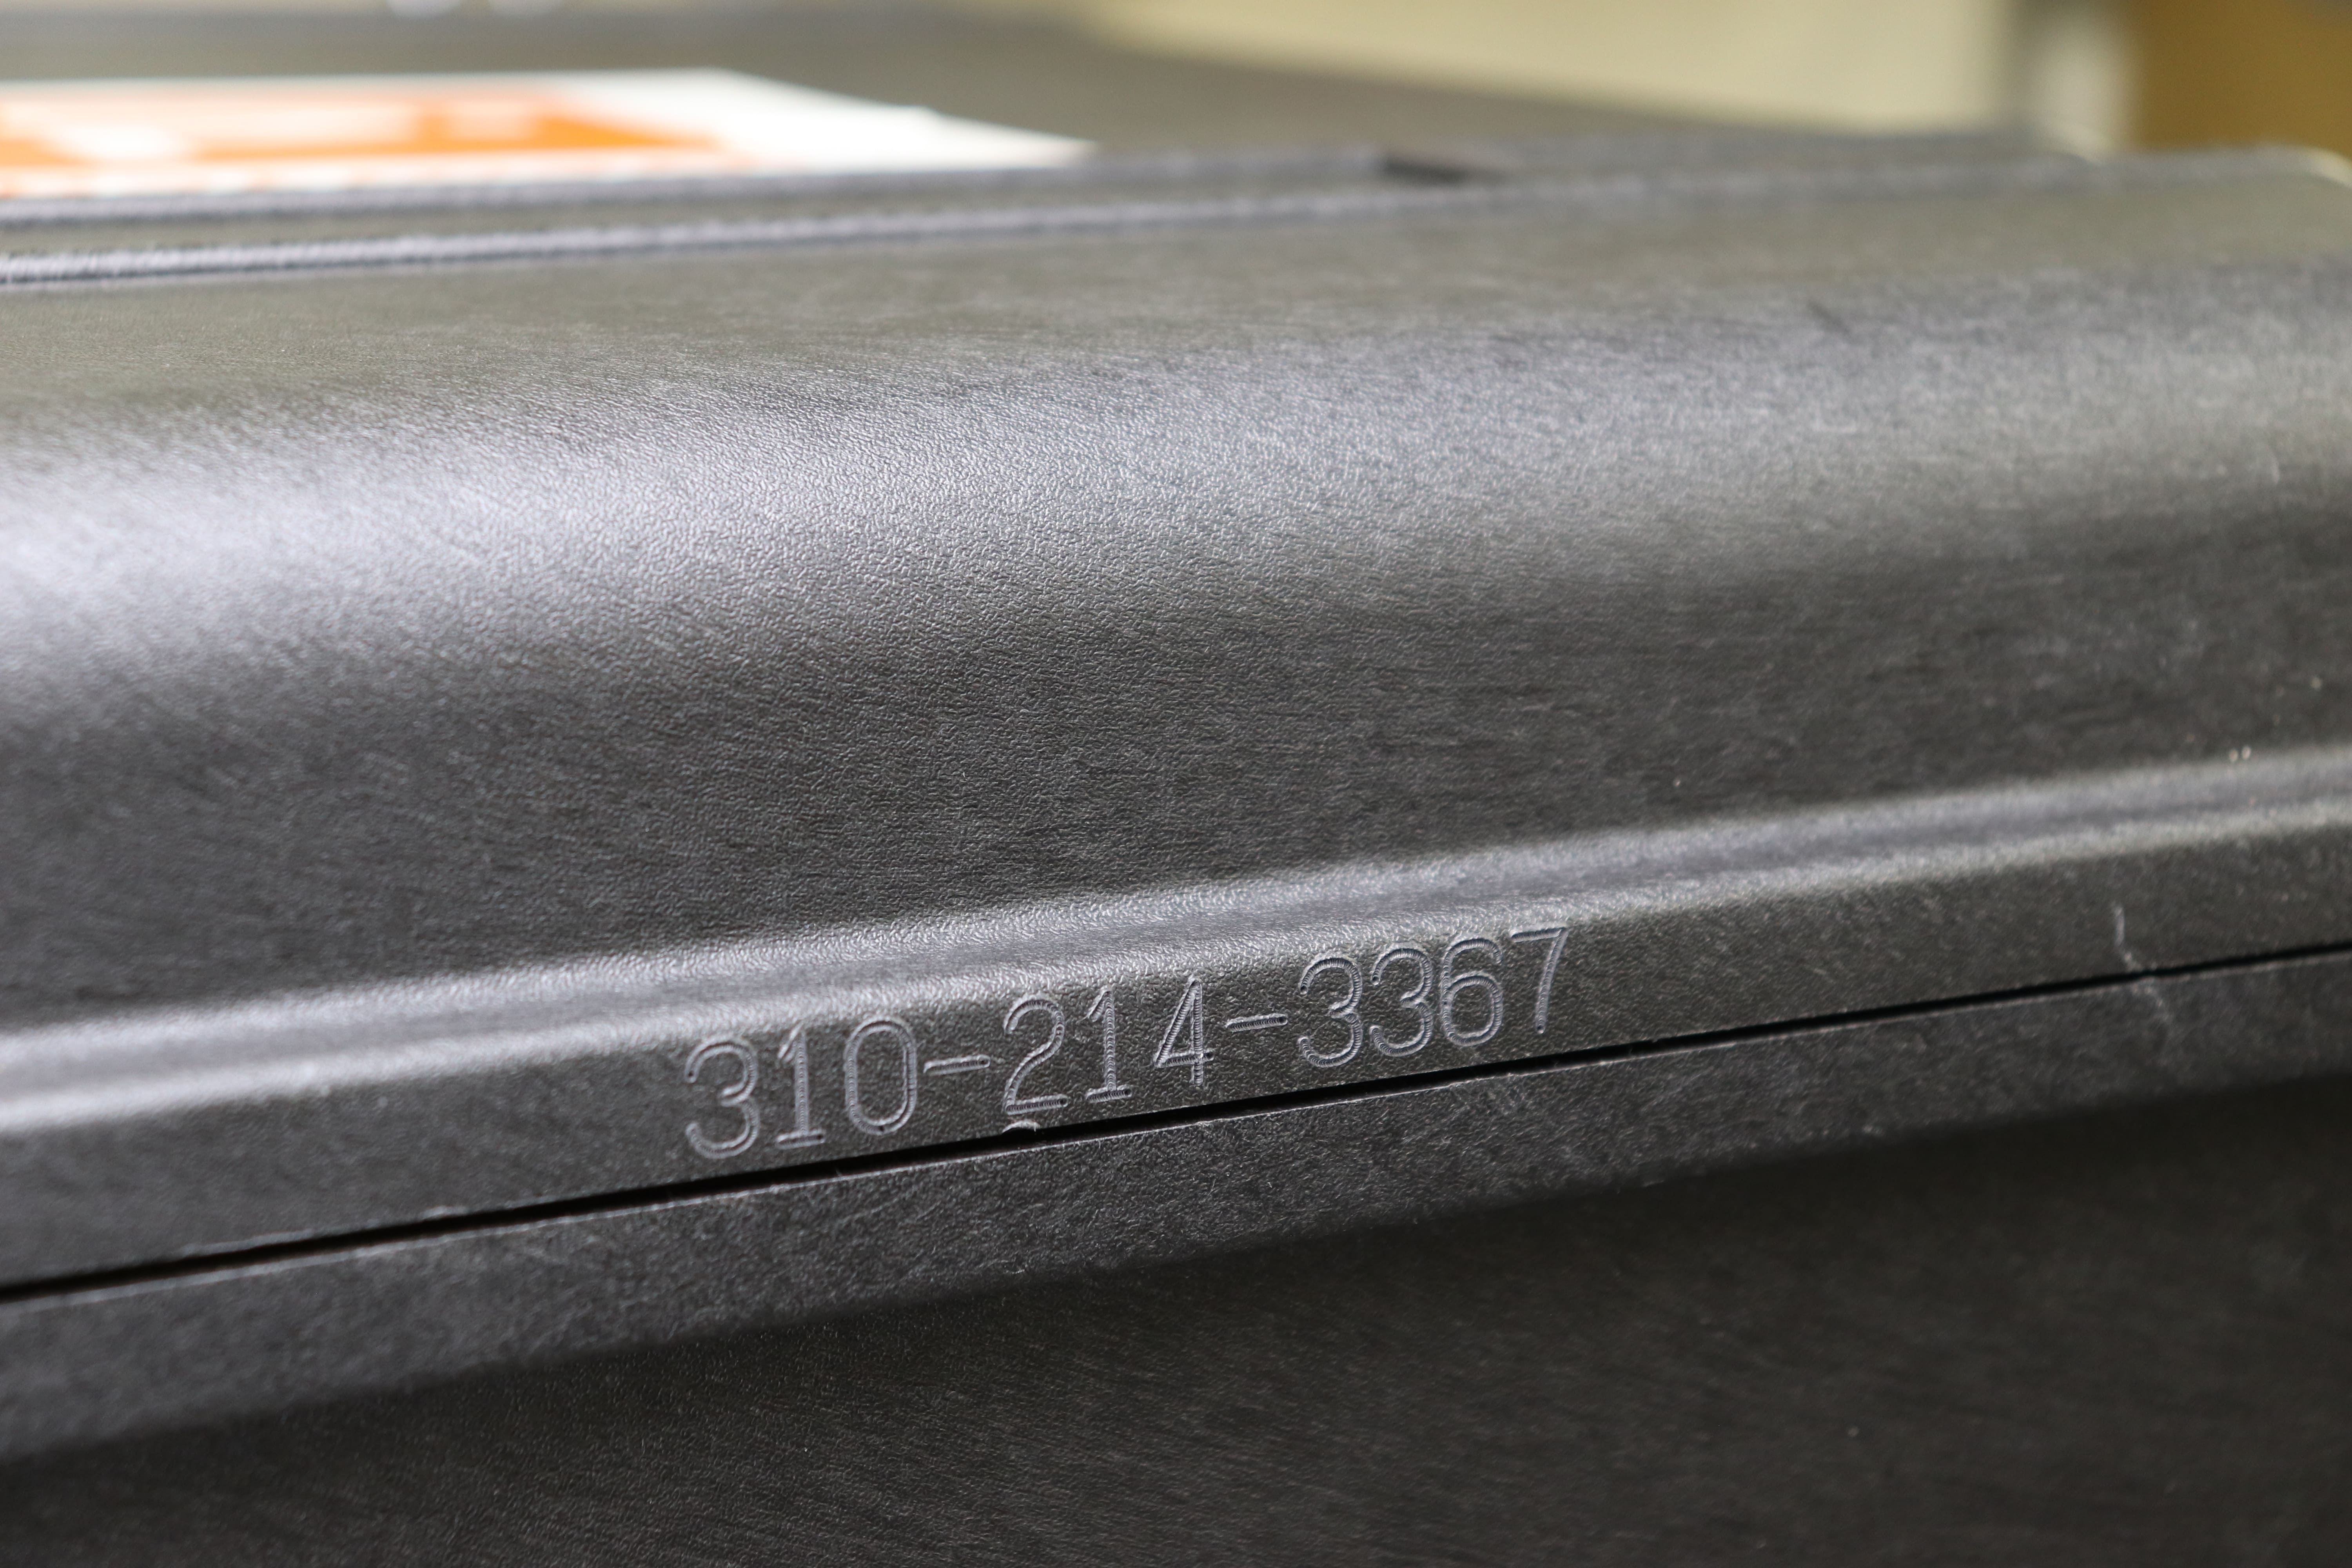 Image of the thin edge of the carrying case engraved with the product number '310-214-3367'.